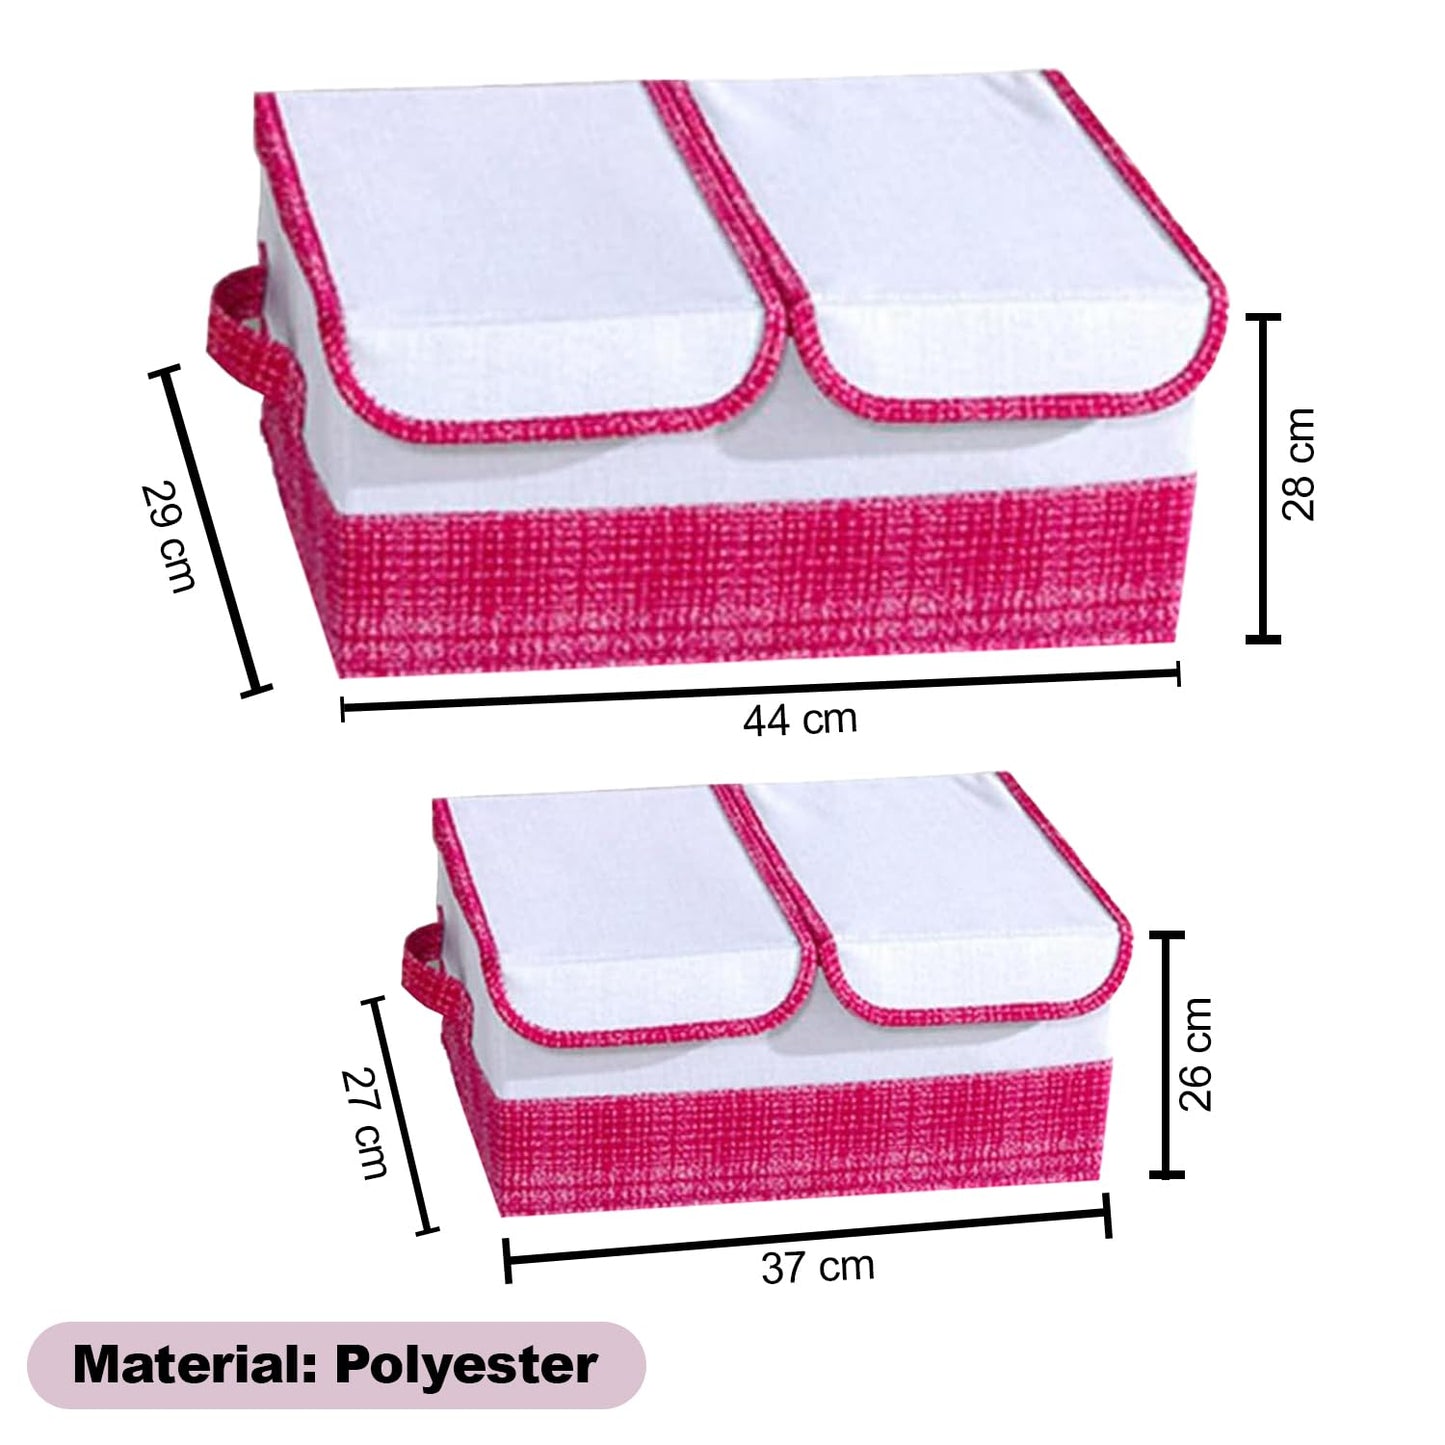 Kuber Industries 2 Pcs Foldable Storage Basket With Lid  Closet Organizer With Handle  Clothes Organizer for Wardrobe  Versatile Storage Basket For Toys-Clothes-Papers-Books-Makeups  Pink